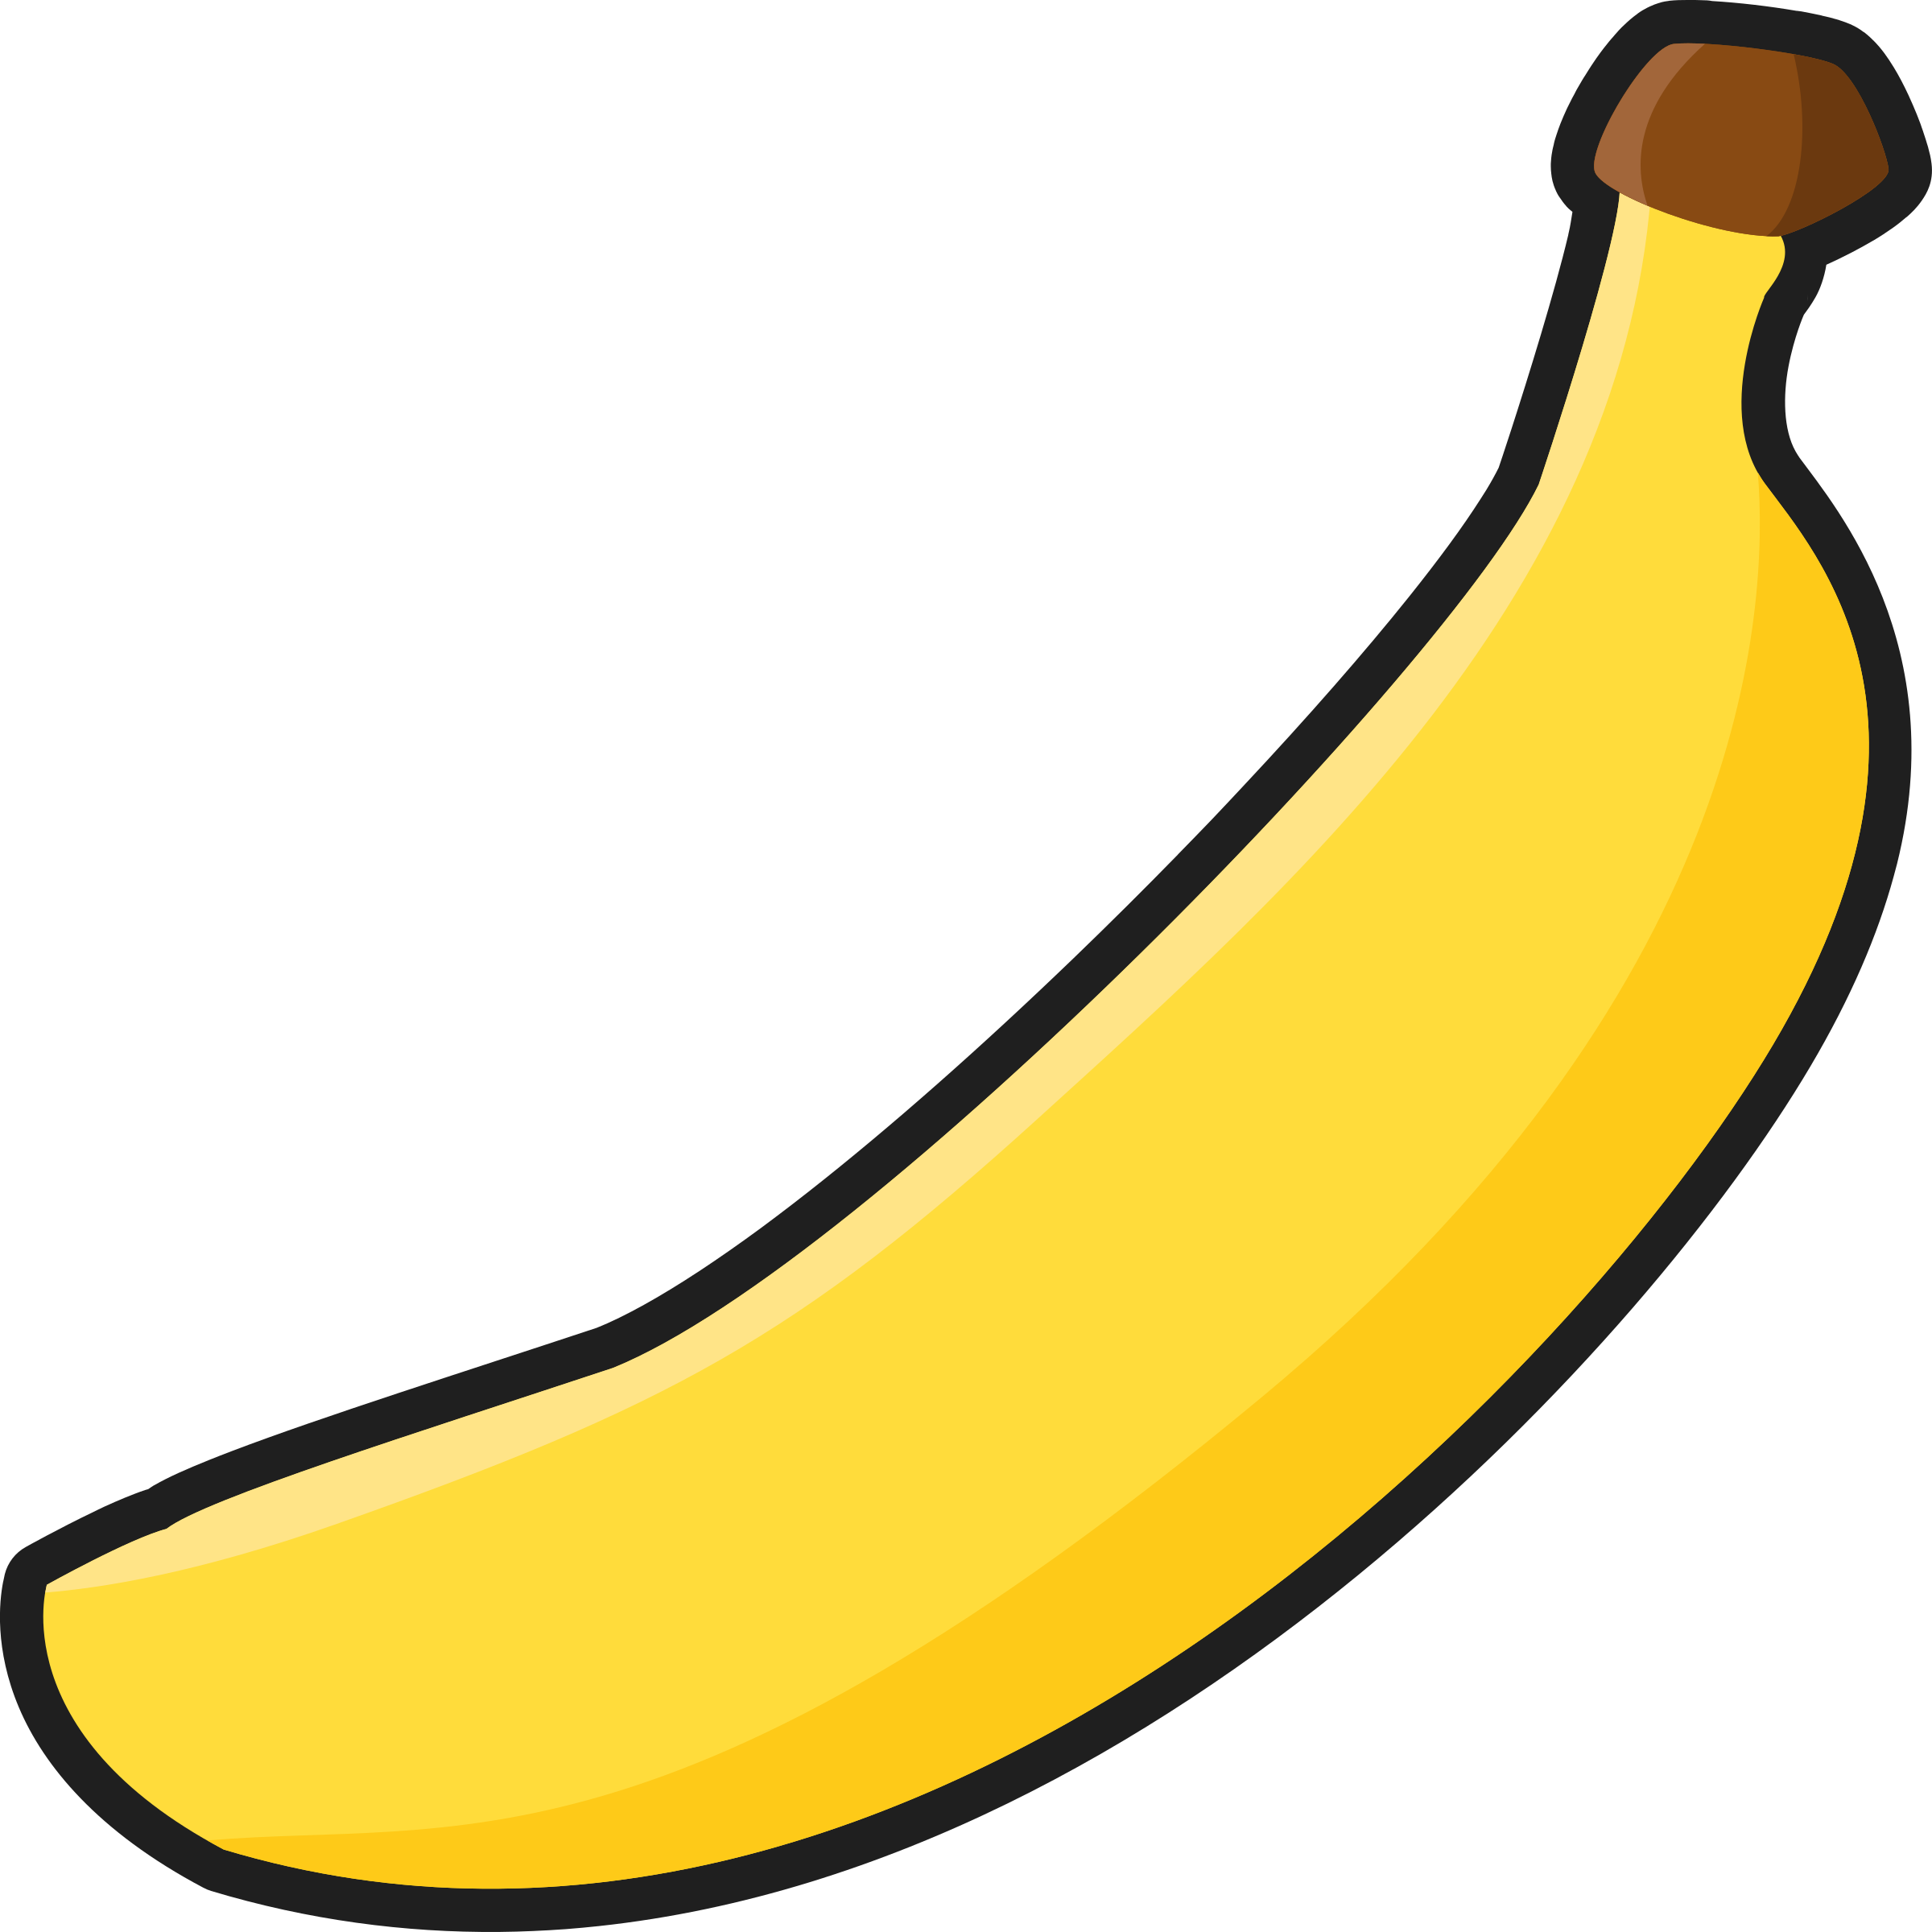 Clipart simple banana outlined image